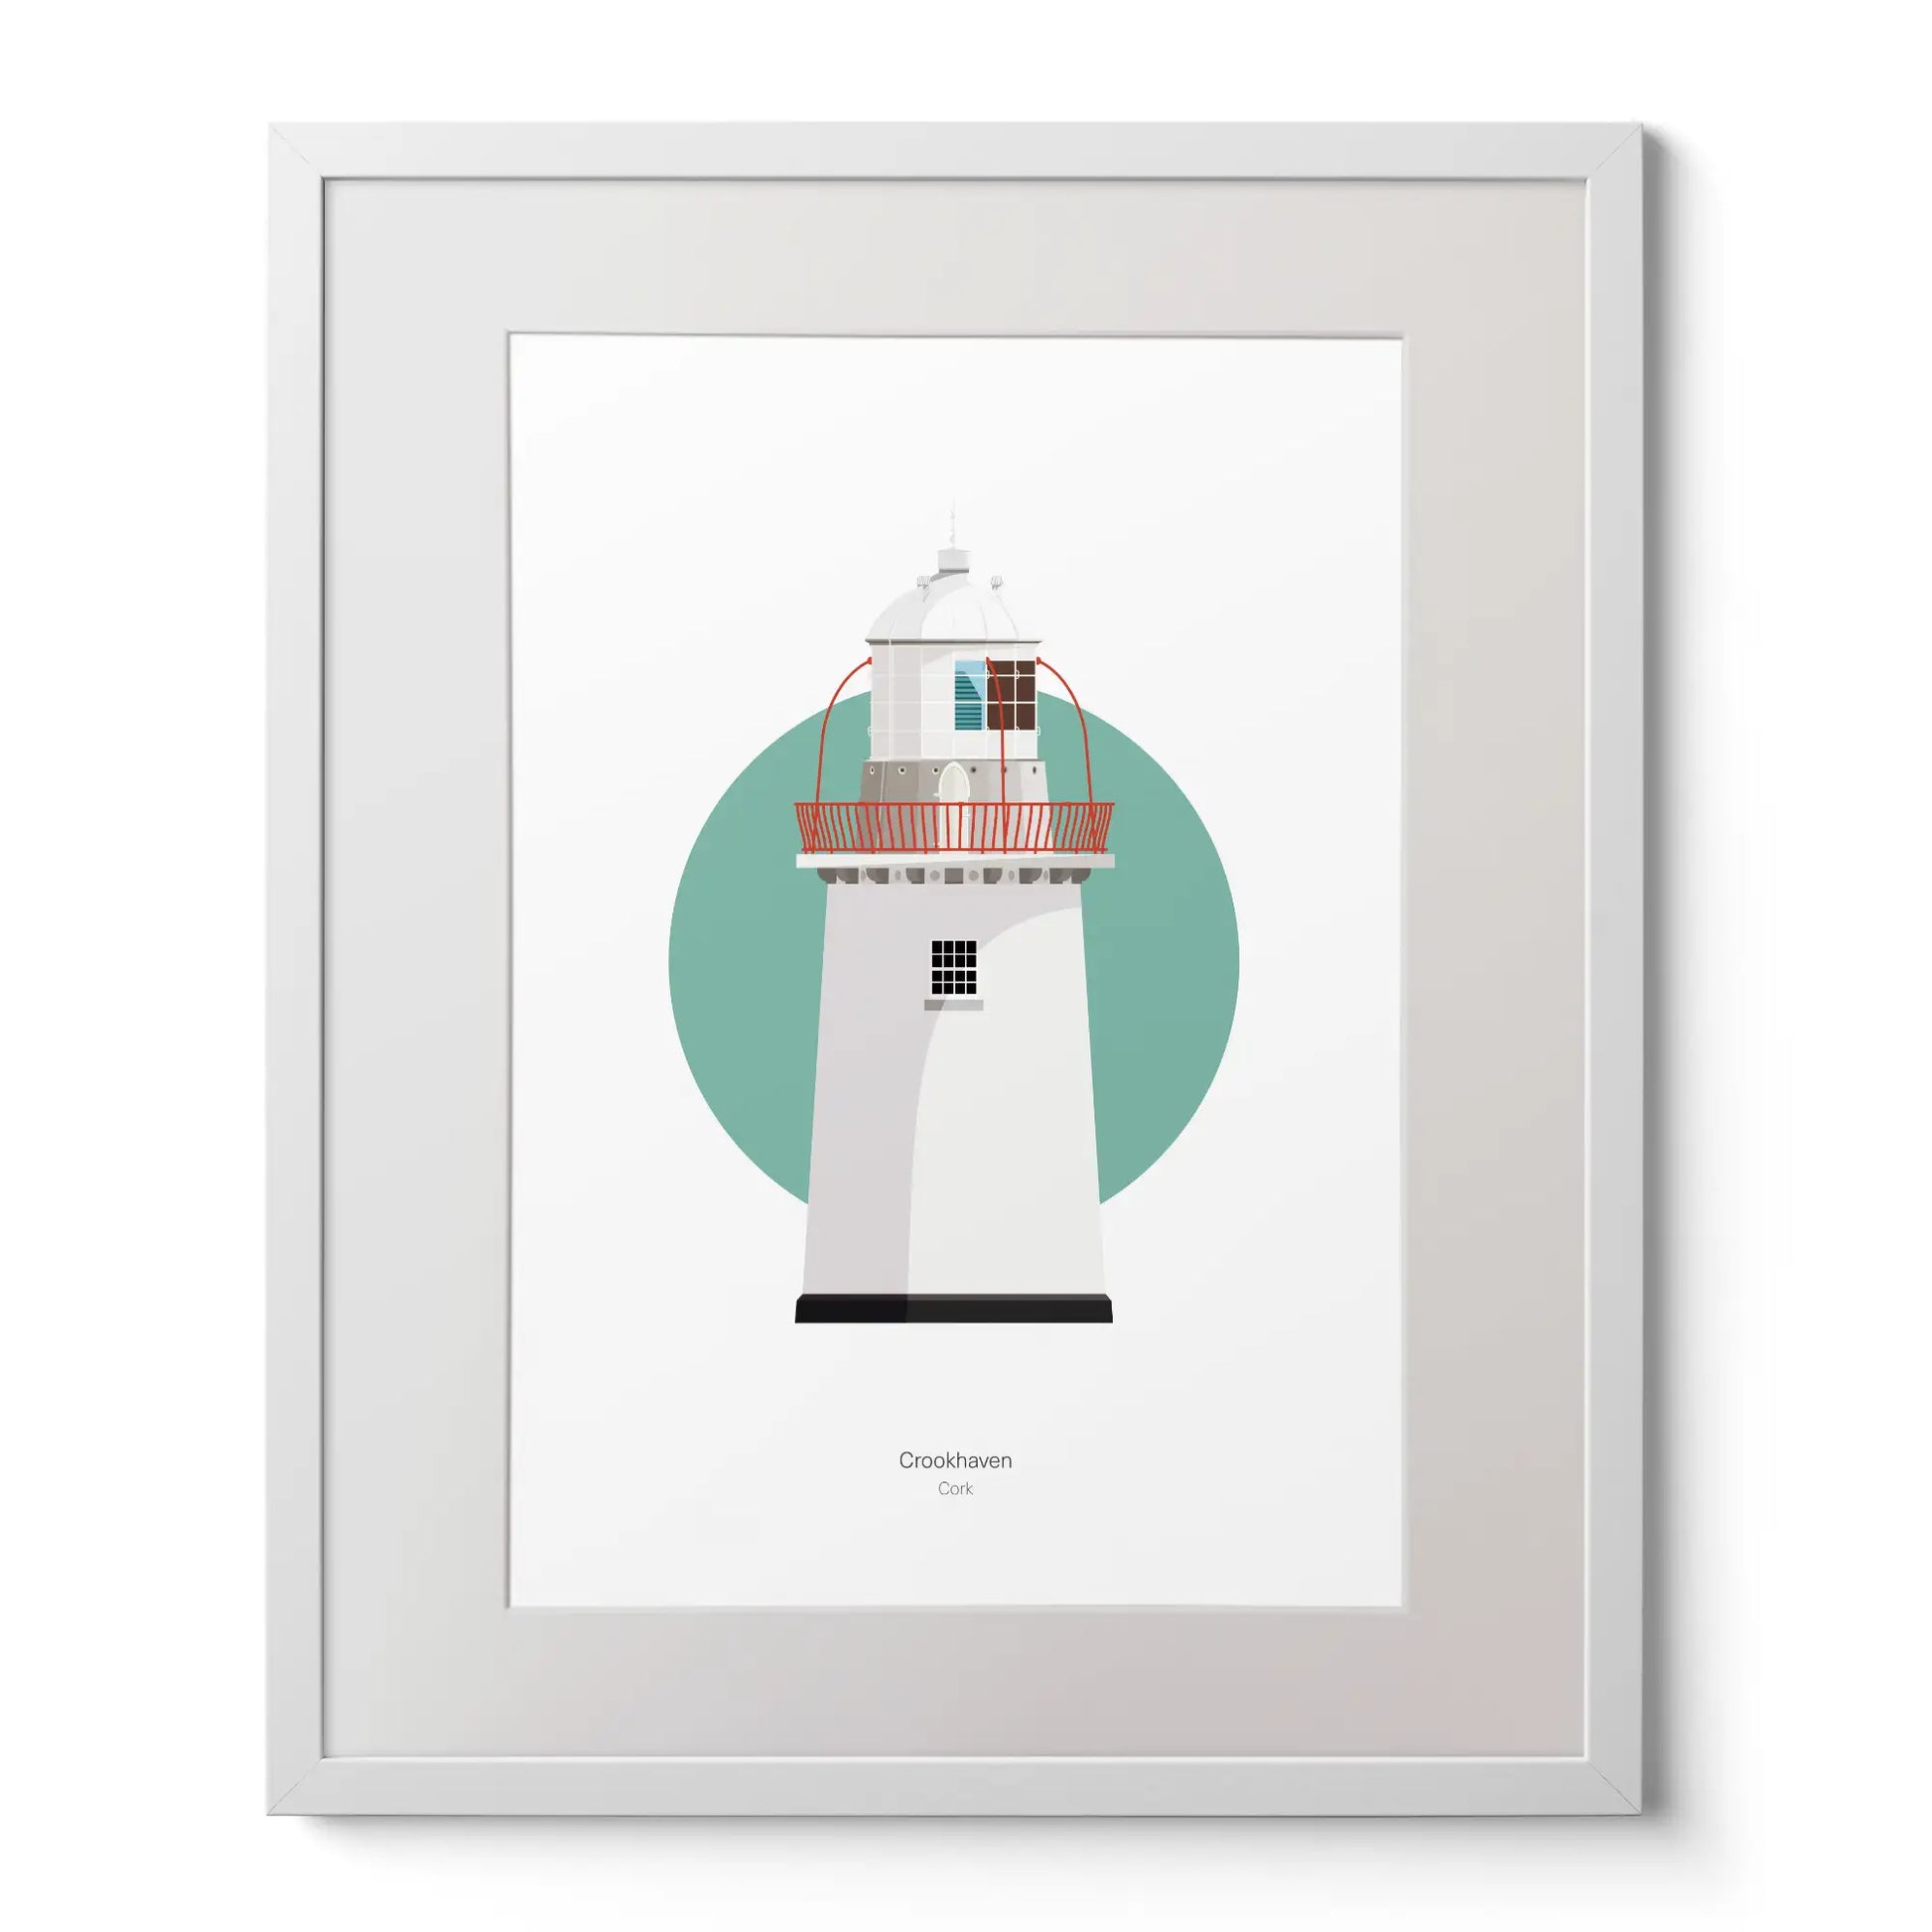 Illustration of Crookhaven lighthouse on a white background inside light blue square,  in a white frame measuring 40x50cm.